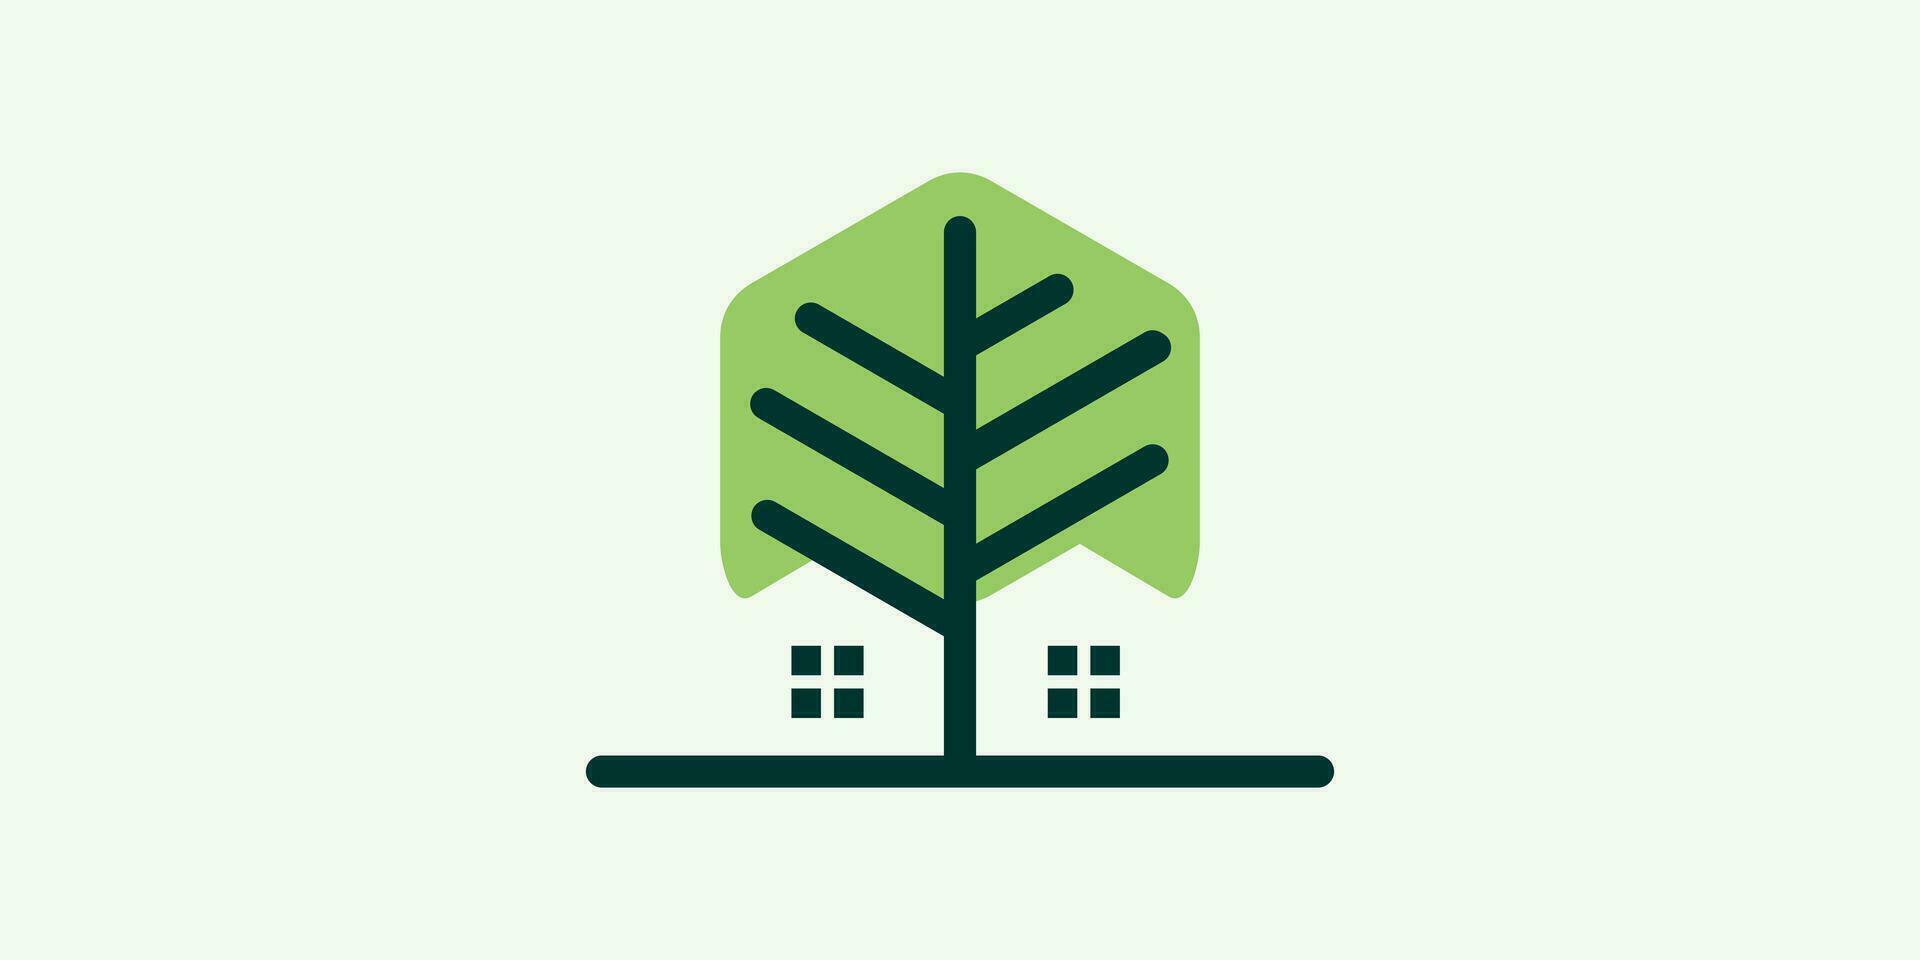 logo design combining the shape of a tree with a house made in a minimalist and abstract style. vector